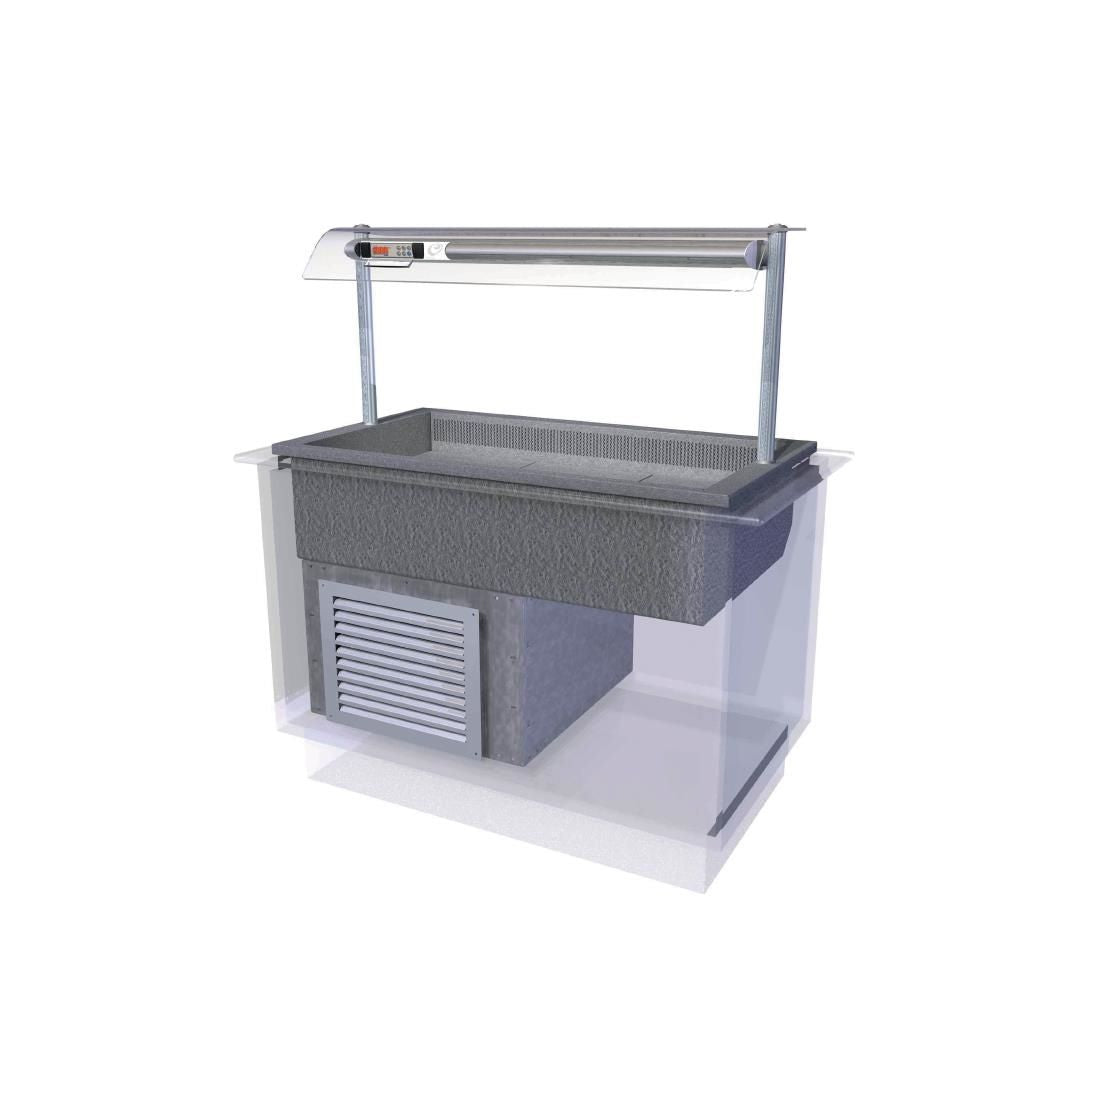 CW611 Designline Drop In Cold Well Self Service 1175mm JD Catering Equipment Solutions Ltd